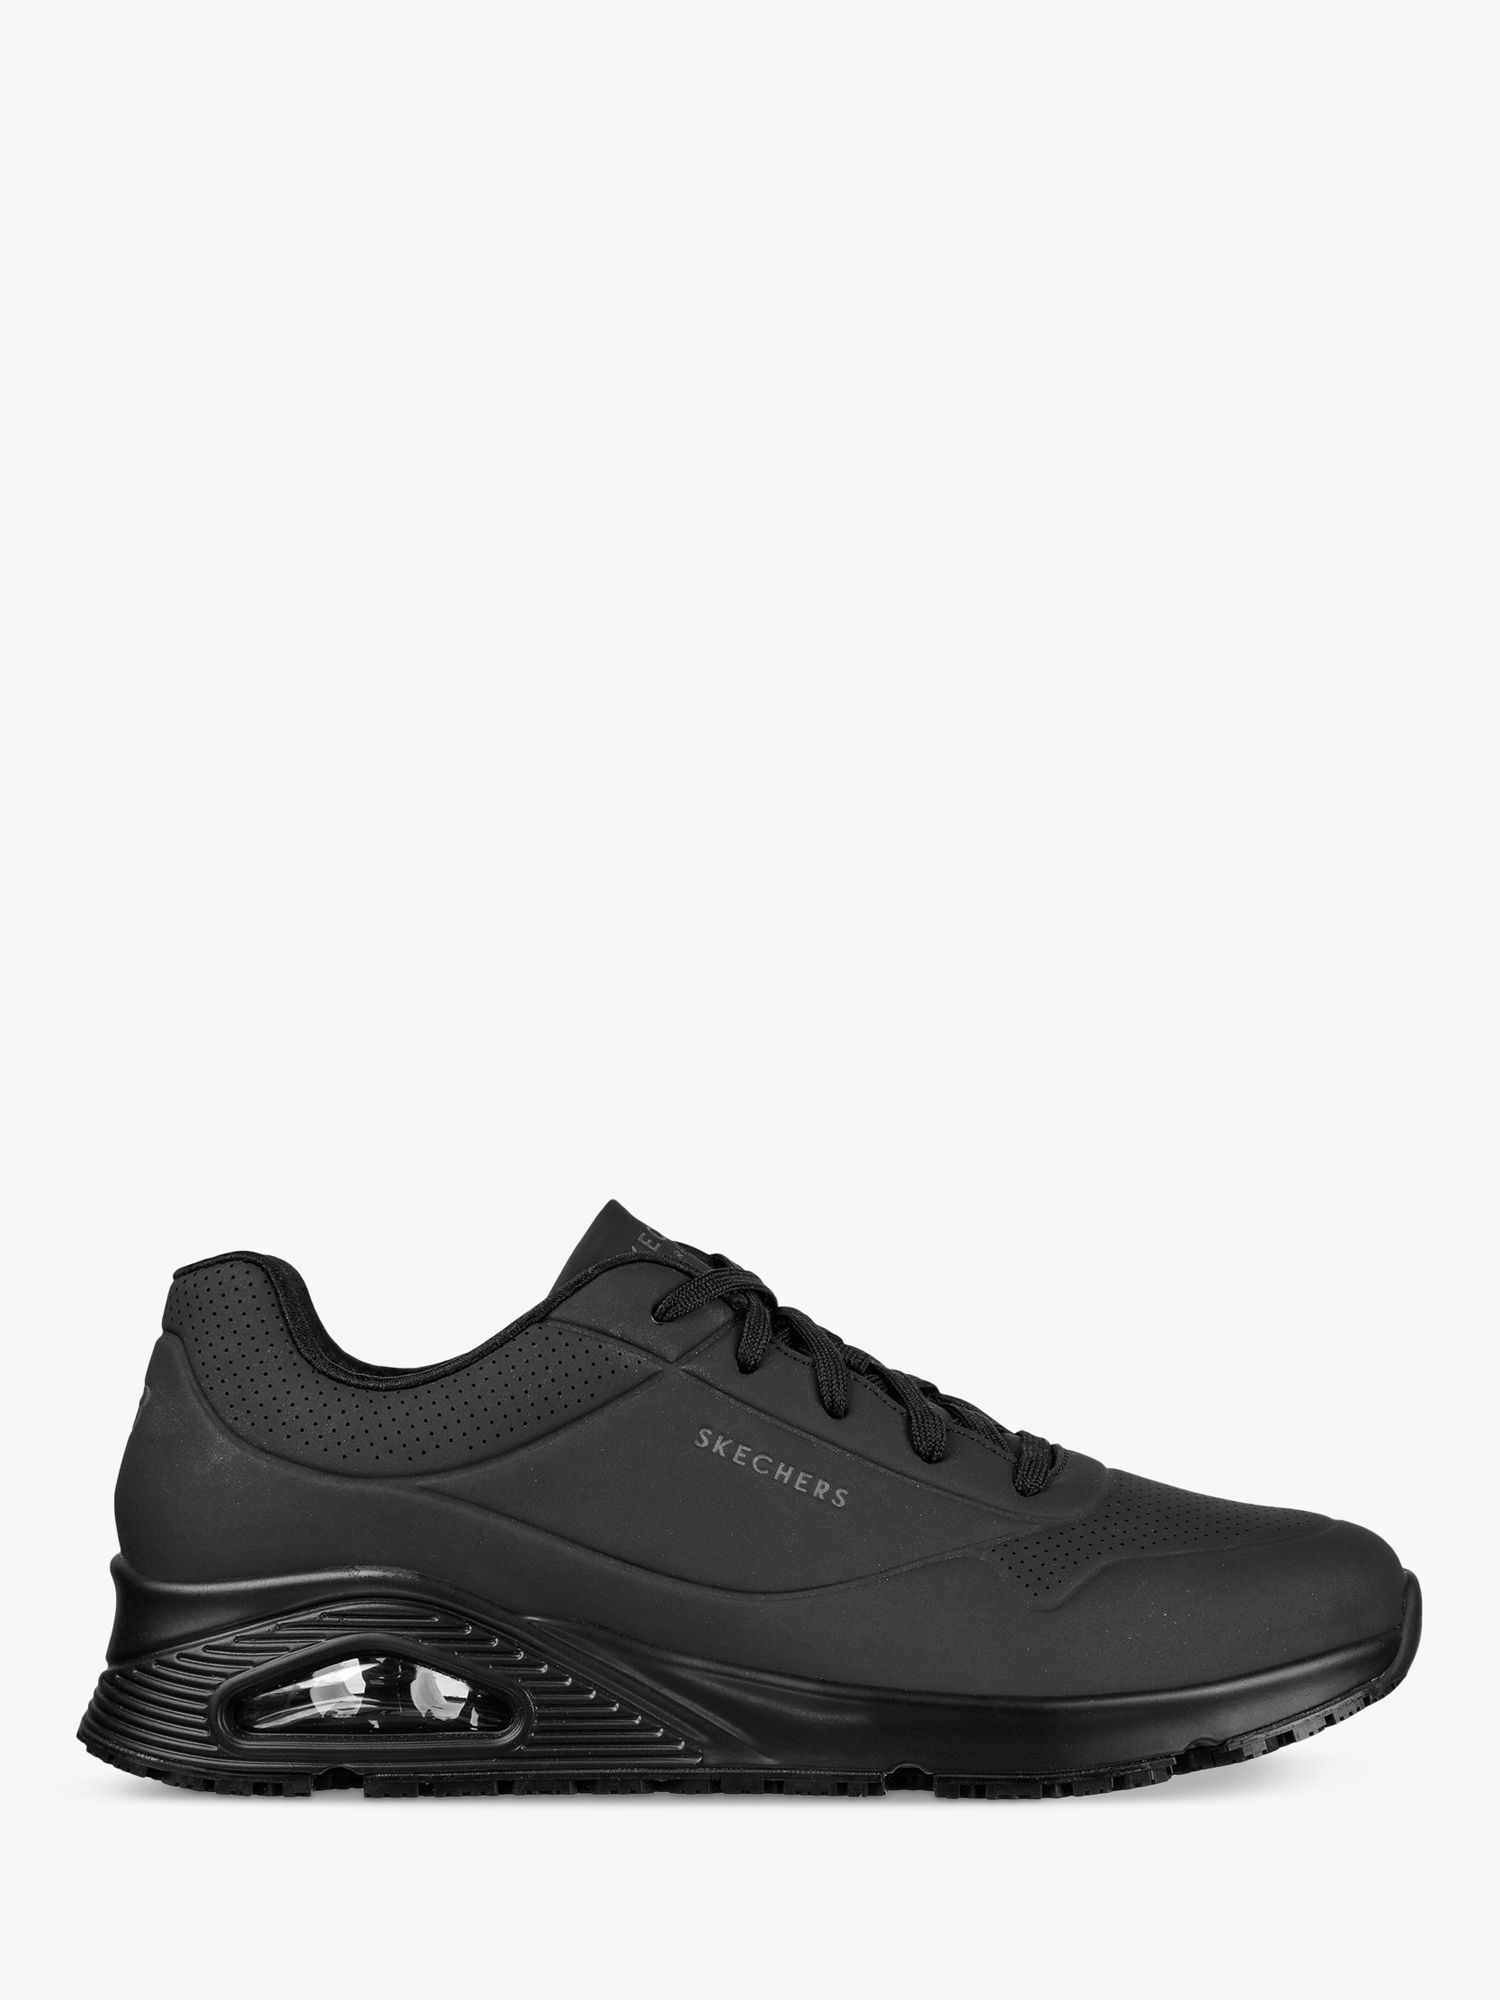 Skechers Work Relaxed Fit: Uno SR - Safety Shoes, Black at John Lewis & Partners